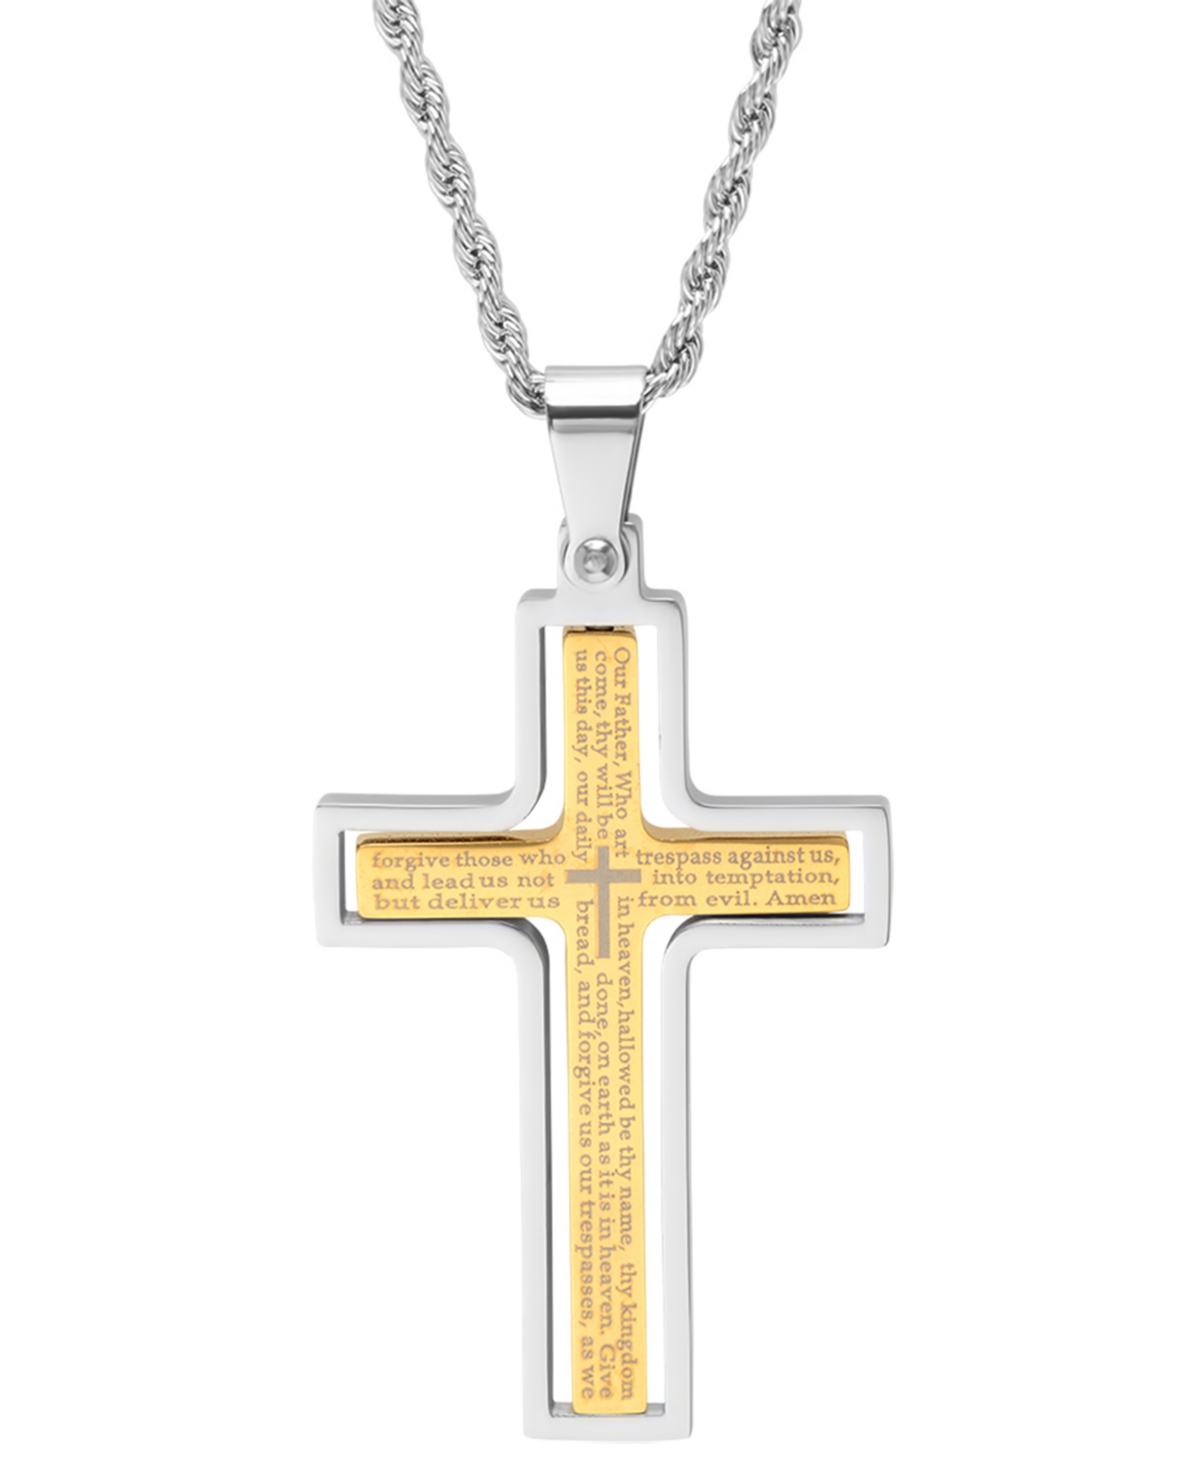 Men's Stainless Steel "Our Father" English Prayer Spinner Cross 24" Pendant Necklace - Silver